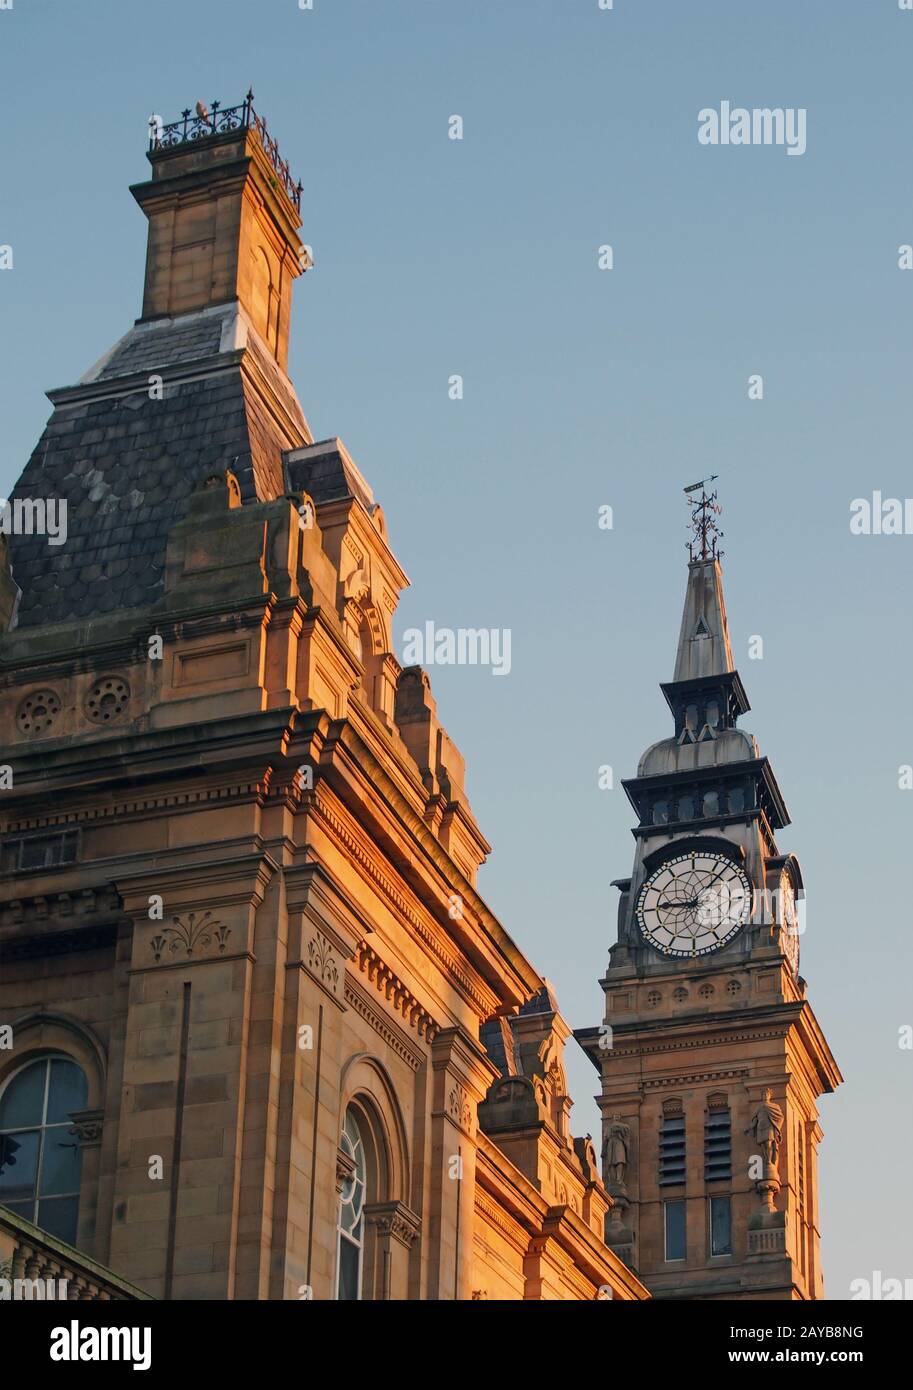 a close up of the roof windows and clock tower of the historic victorian atkinson building in southport merseyside against a blu Stock Photo